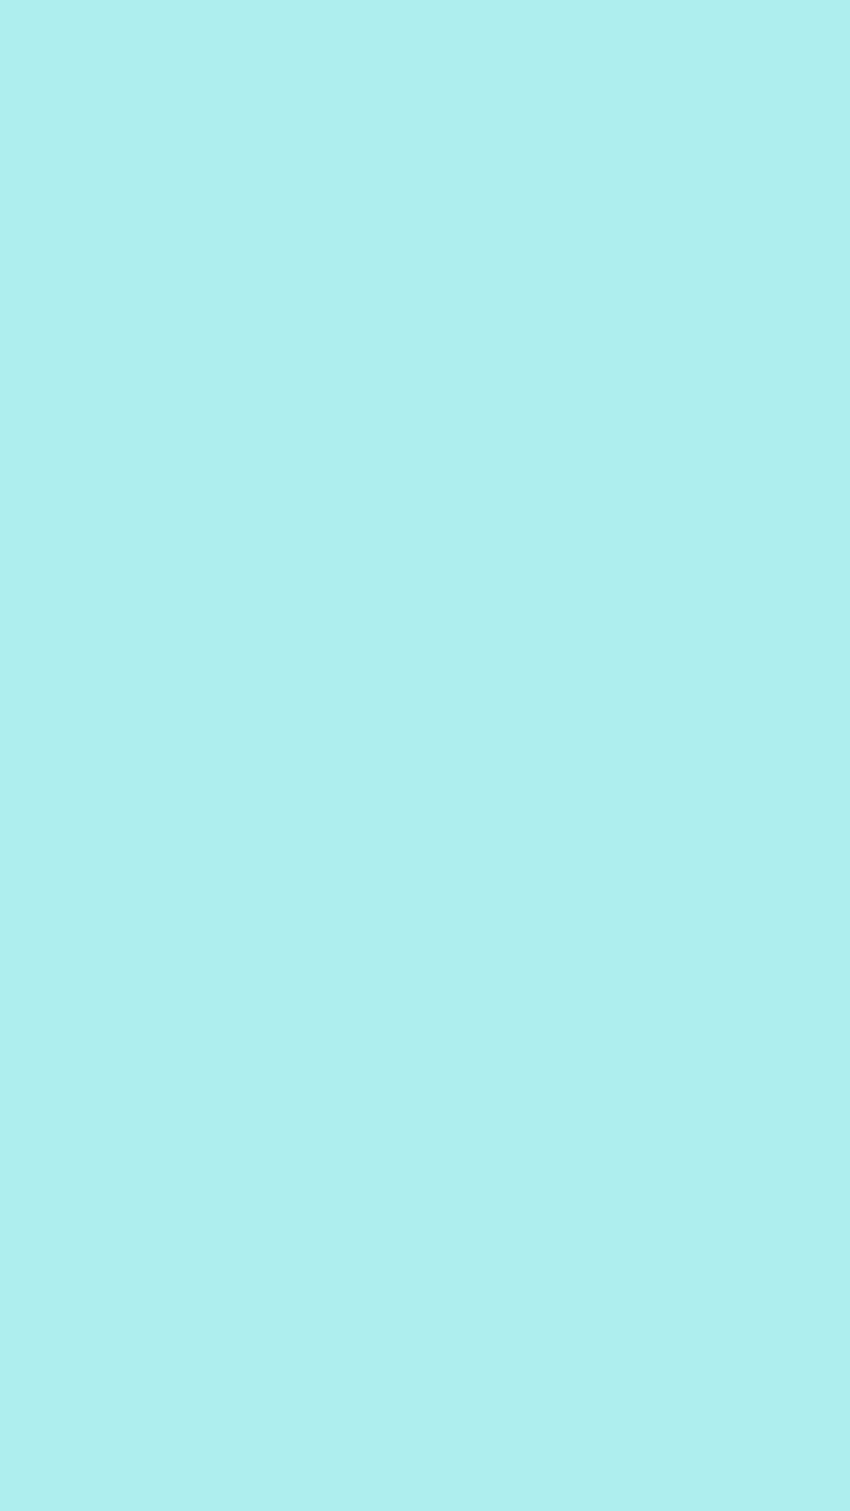 Pale Turquoise Solid Color Background for Mobile Phone HD phone wallpaper